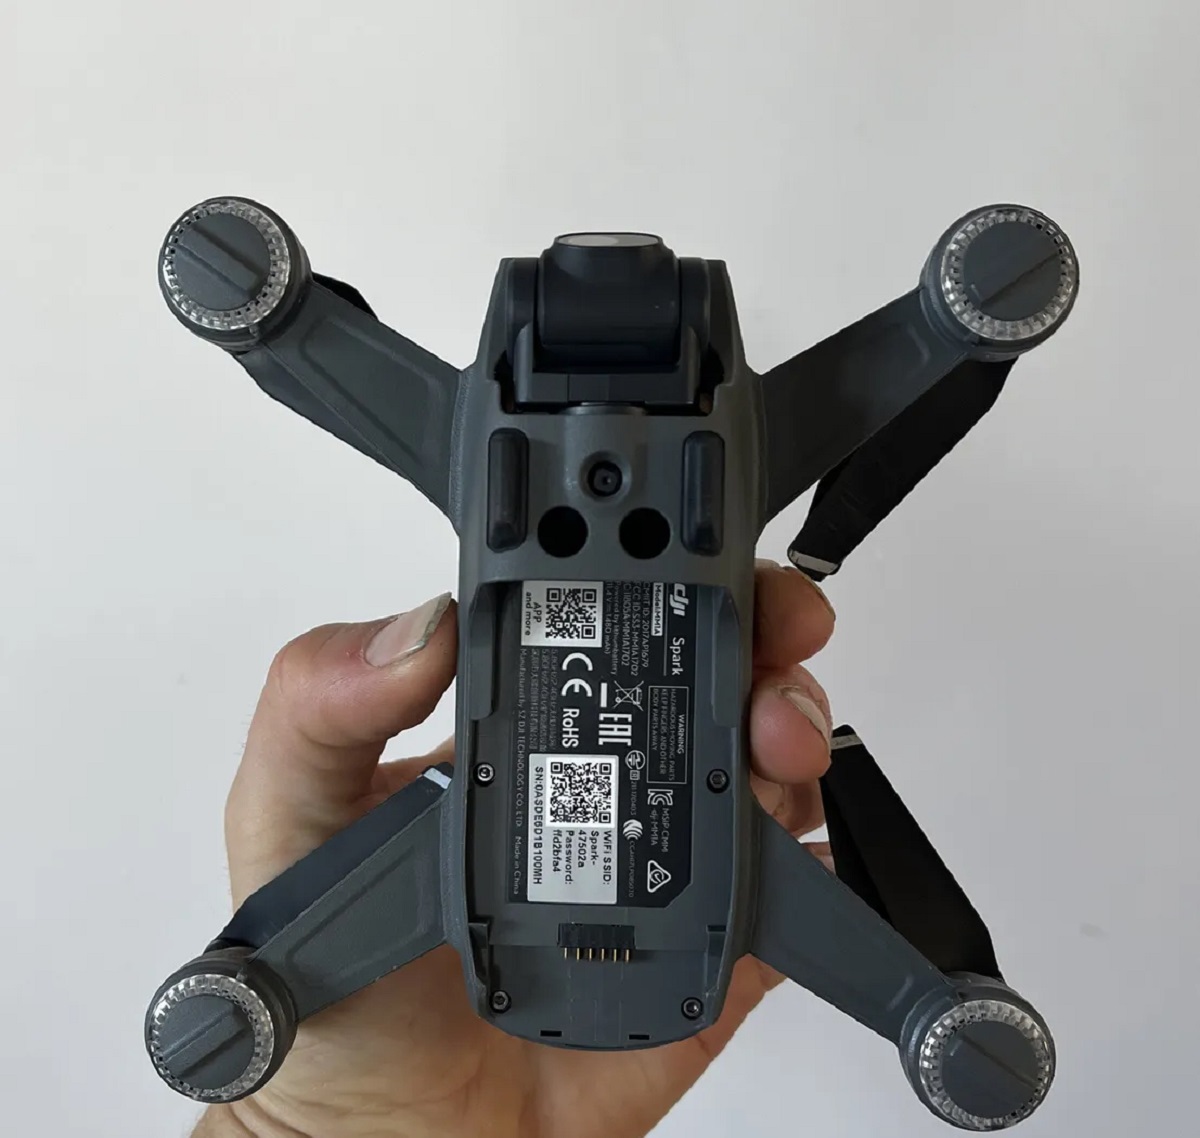 How To Find Drone Serial Number Dji